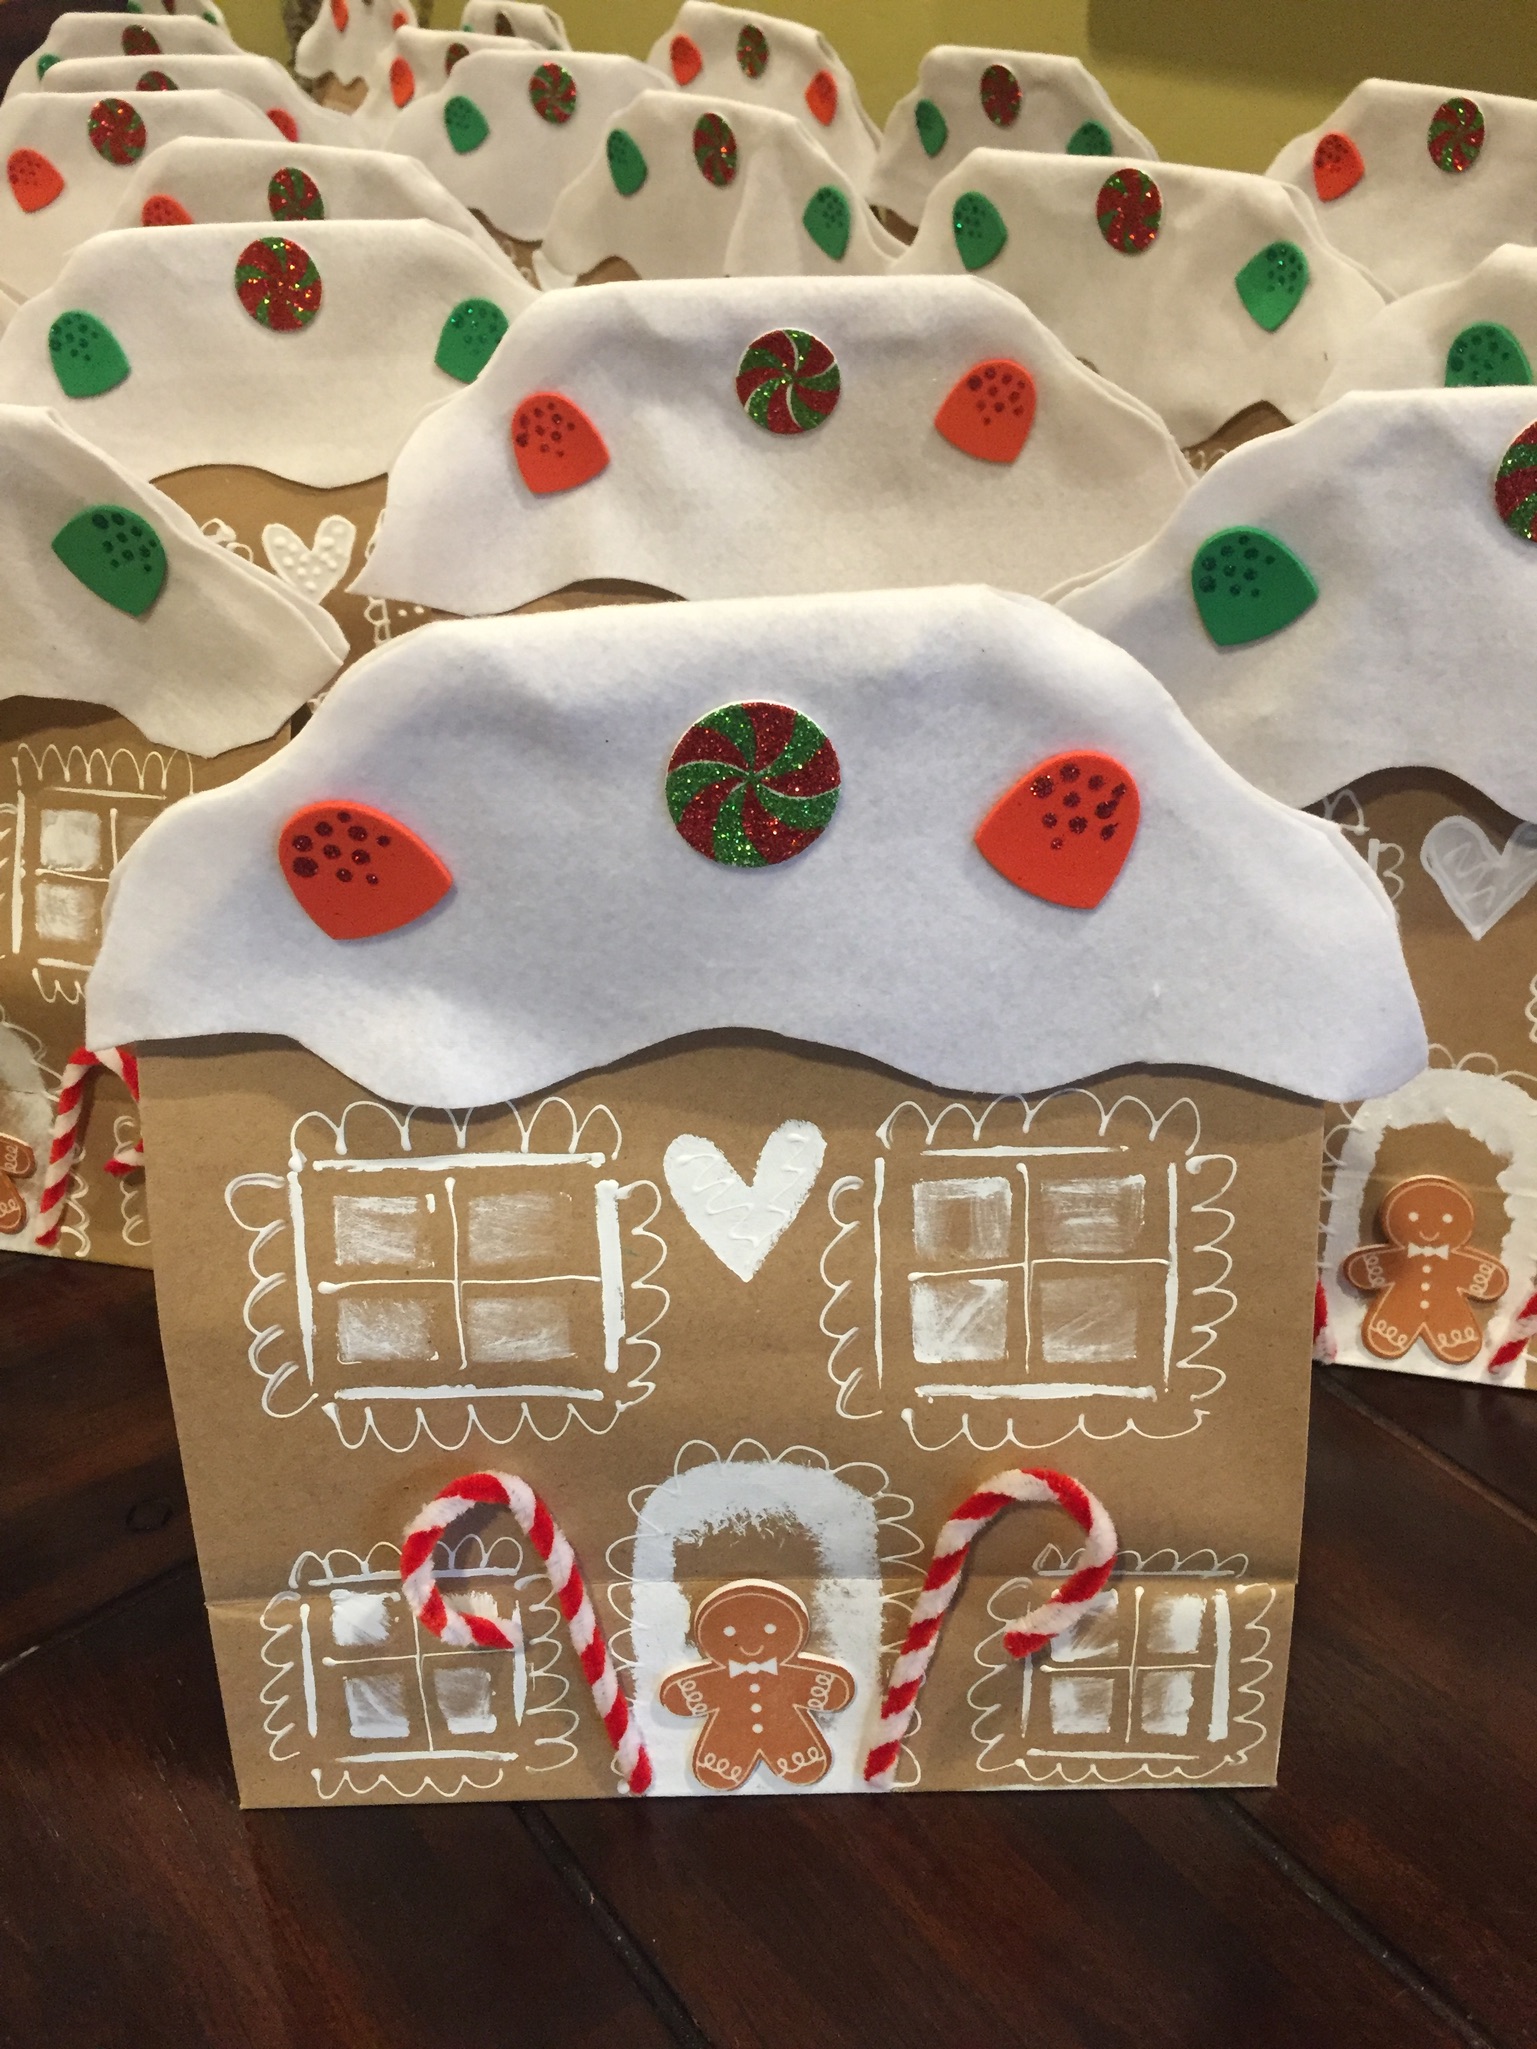 Studio Kraft Gingerbread House Christmas Wrapping Paper